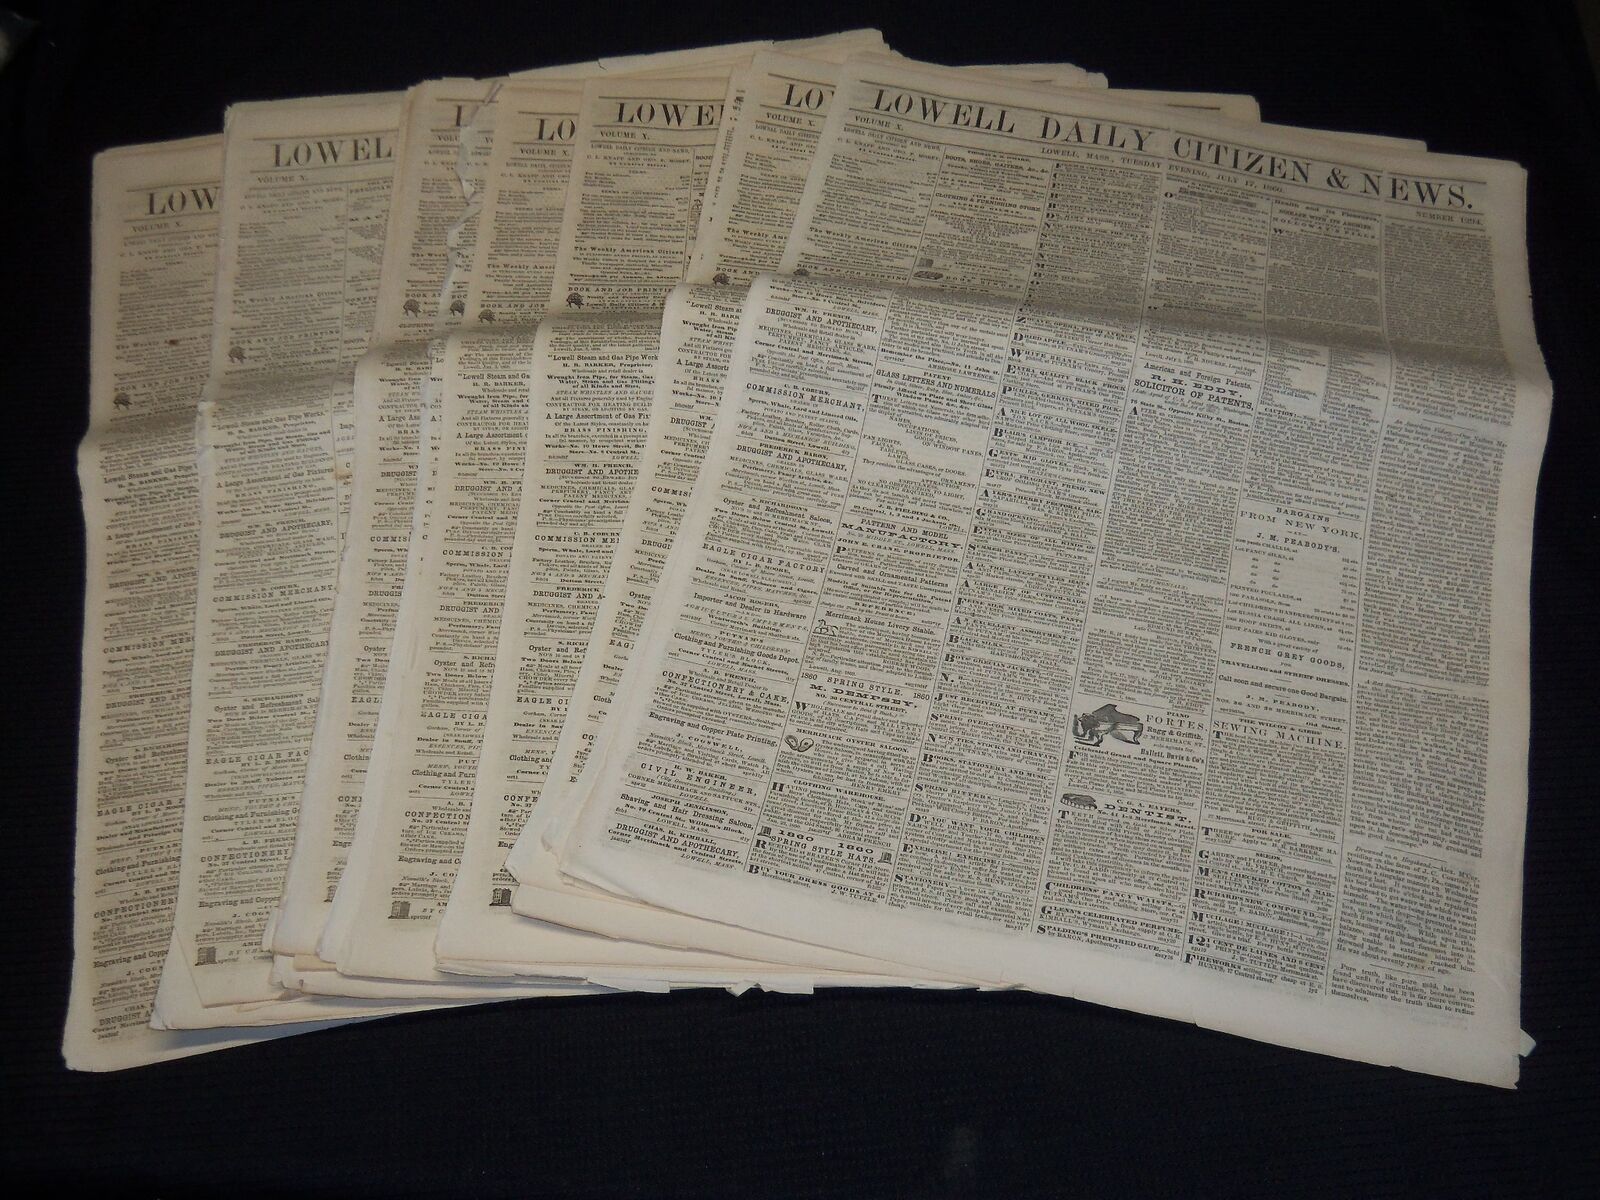 1860 LOWELL DAILY CITIZEN & NEWS LOT OF 26 - LINCOLN & HAMBLIN - NP 3877J